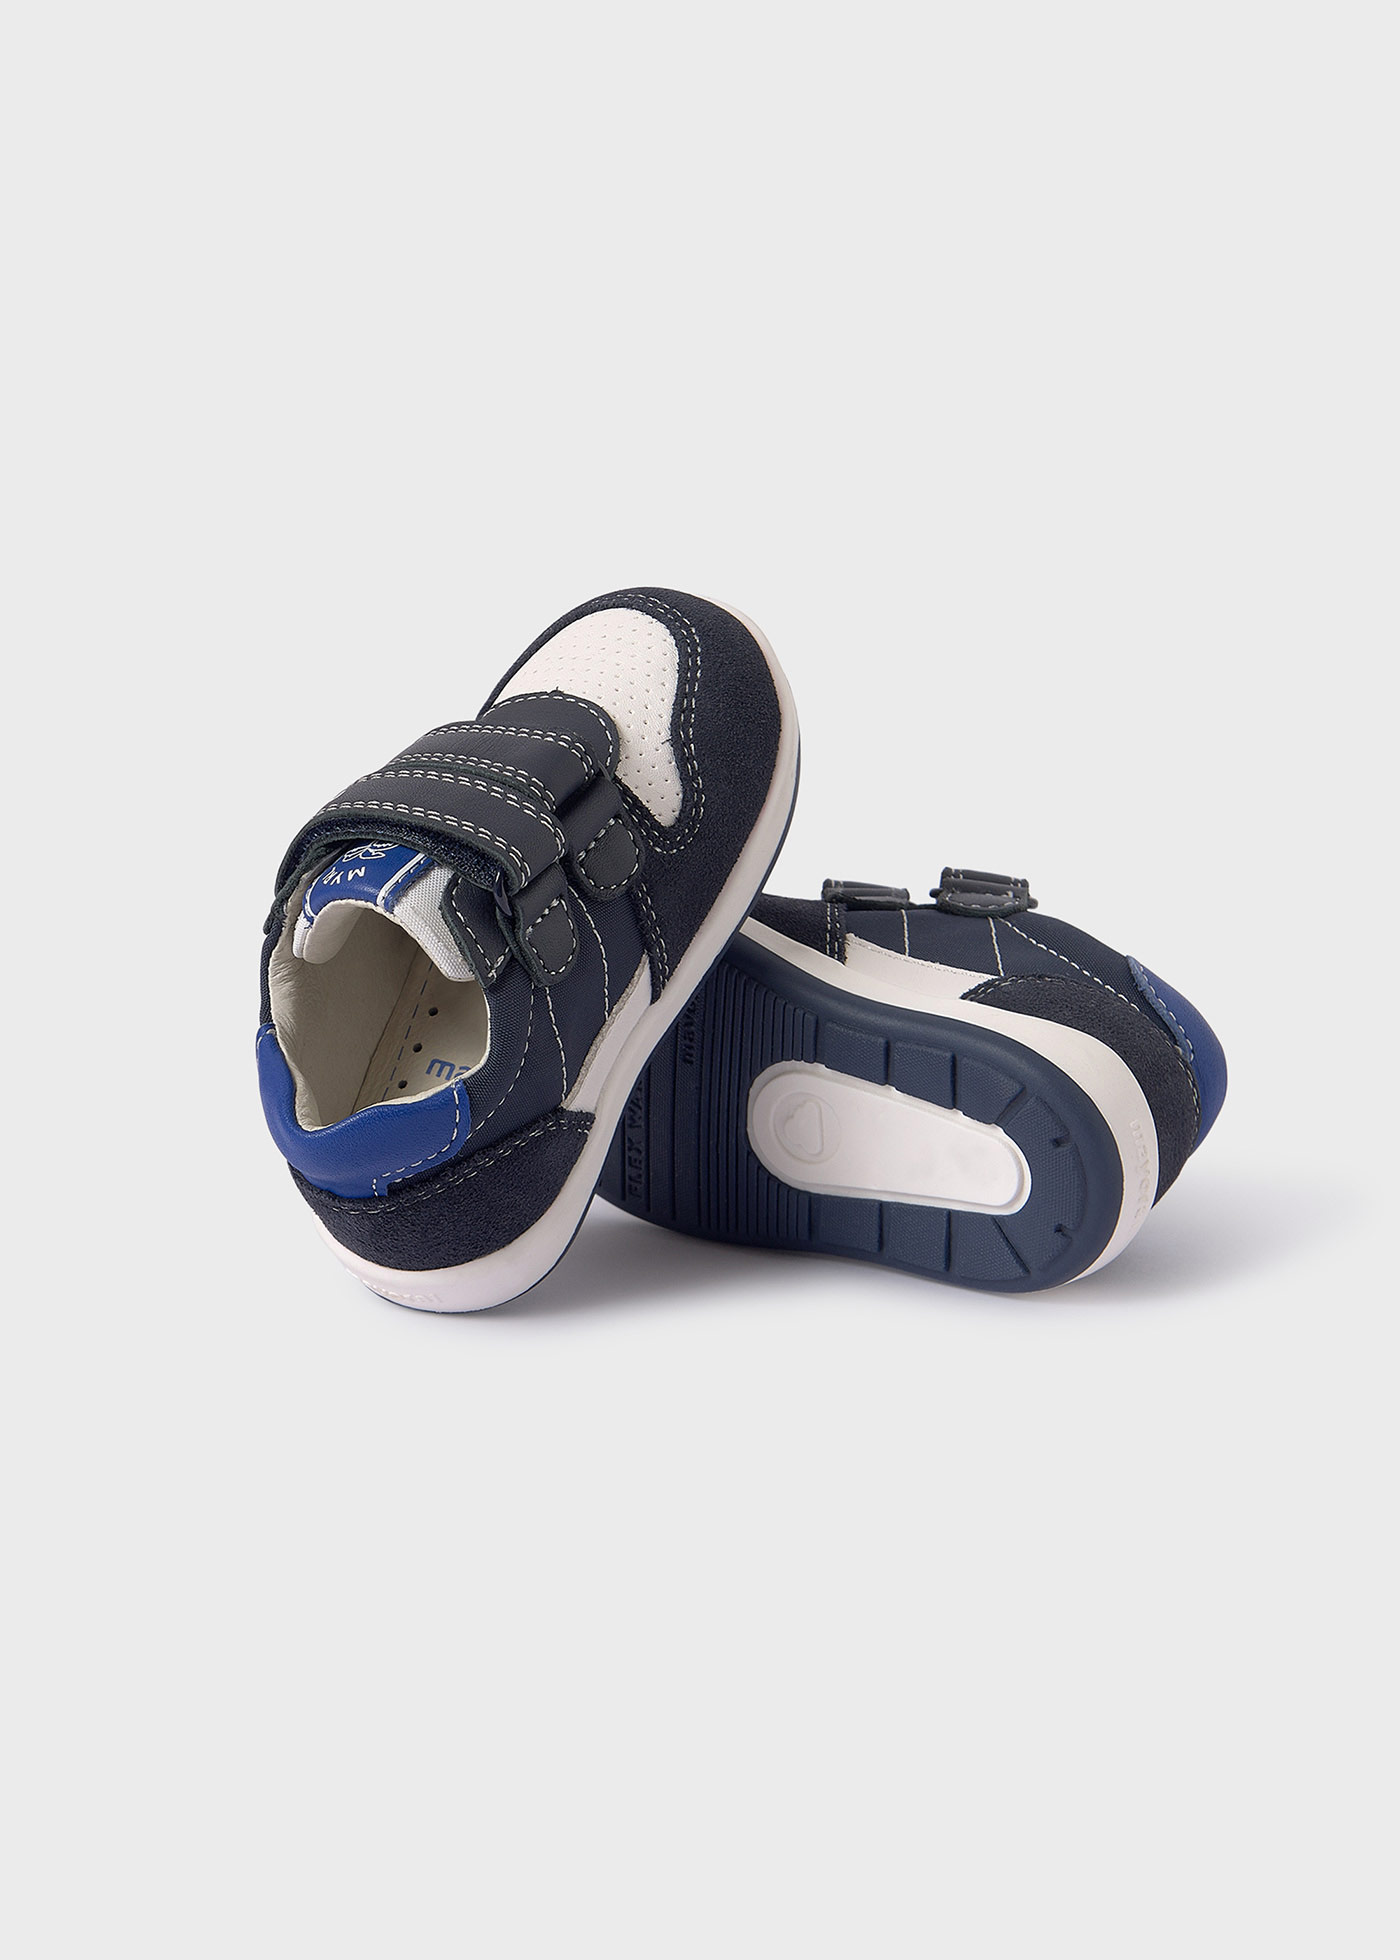 Baby sneakers double velcro strap sustainable leather